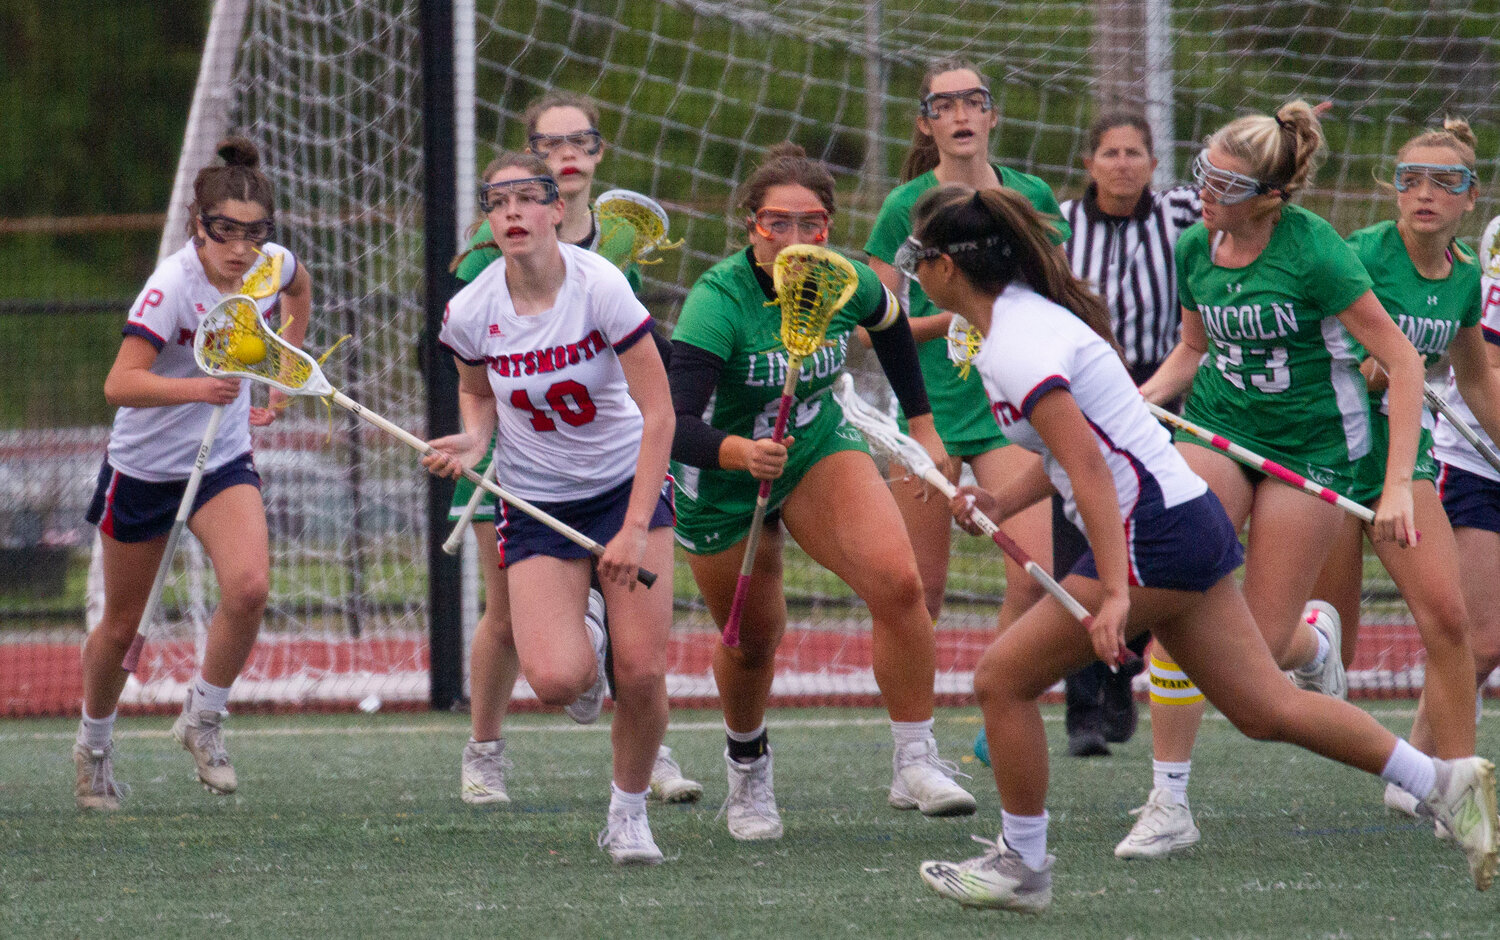 Kaitlin Roche steals the ball in the Patriots’ defensive end and heads upfield.